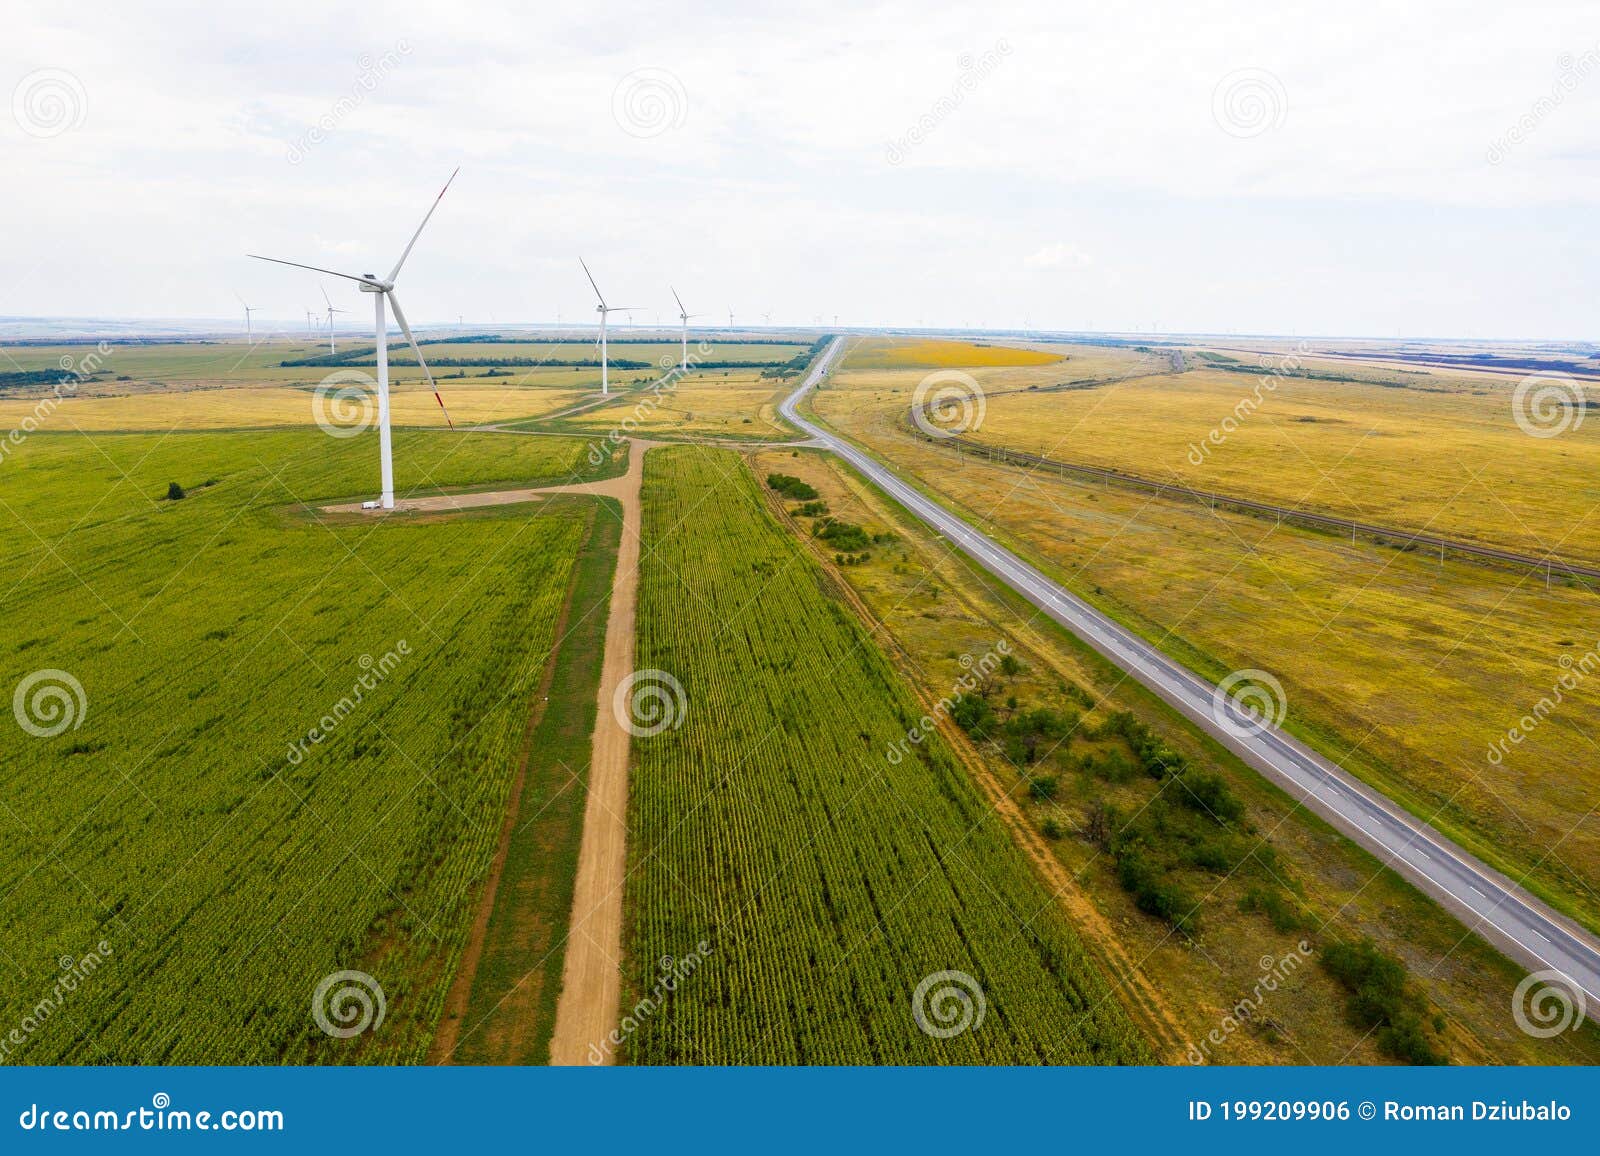 flat terrain with lots of wind turbines in the fields and a highway stretching into the distance. the view from the top.